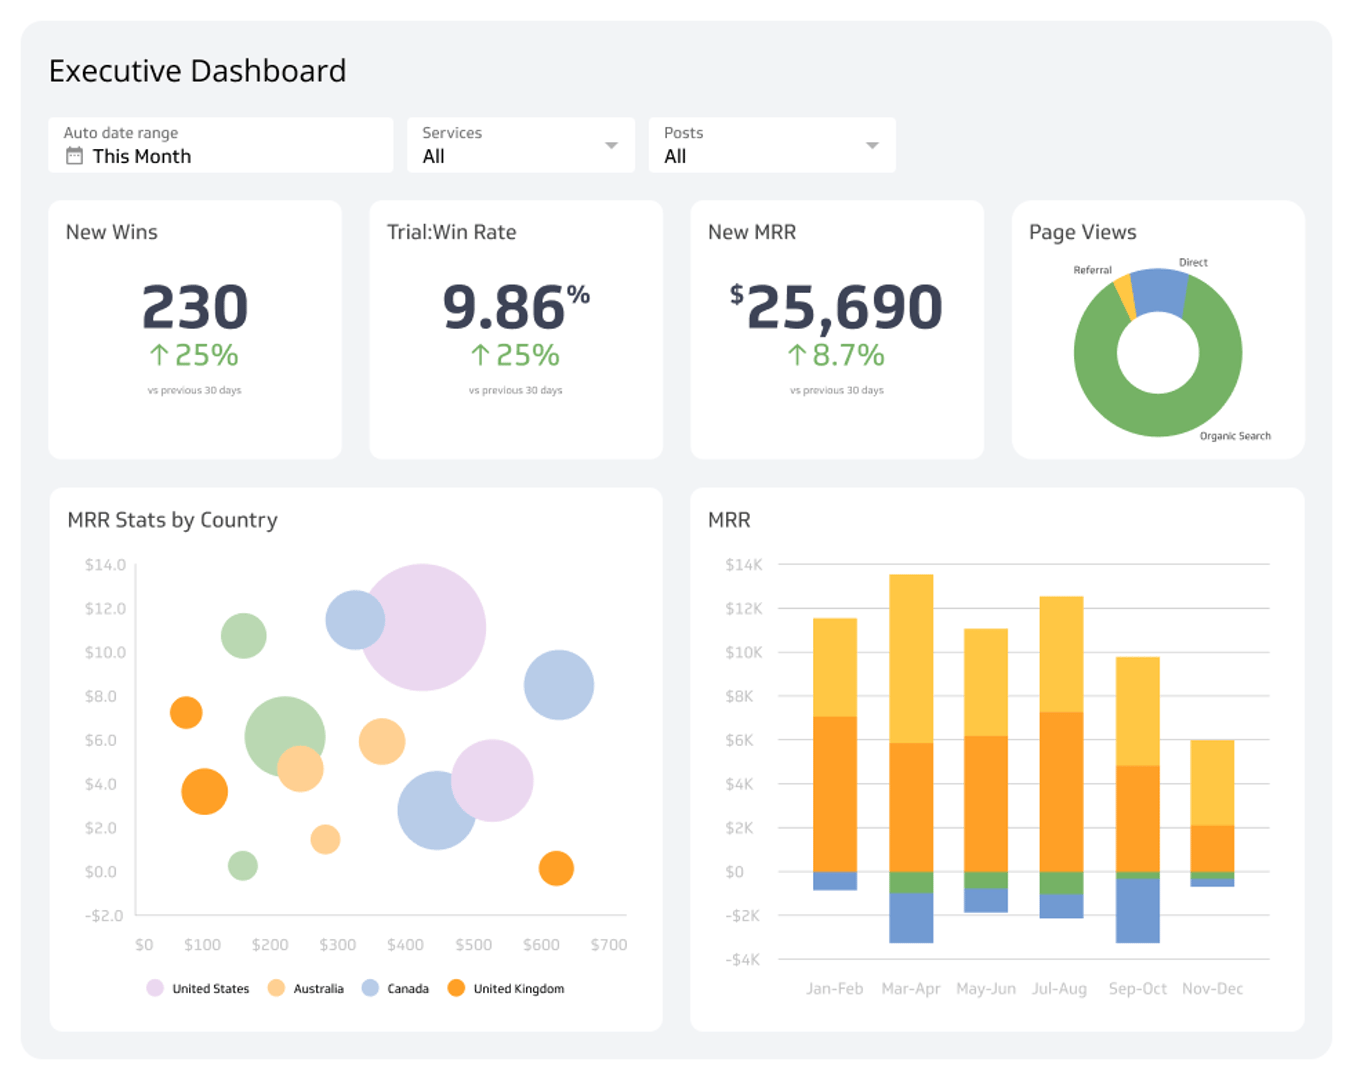 7 Executive Dashboards & Reporting Examples